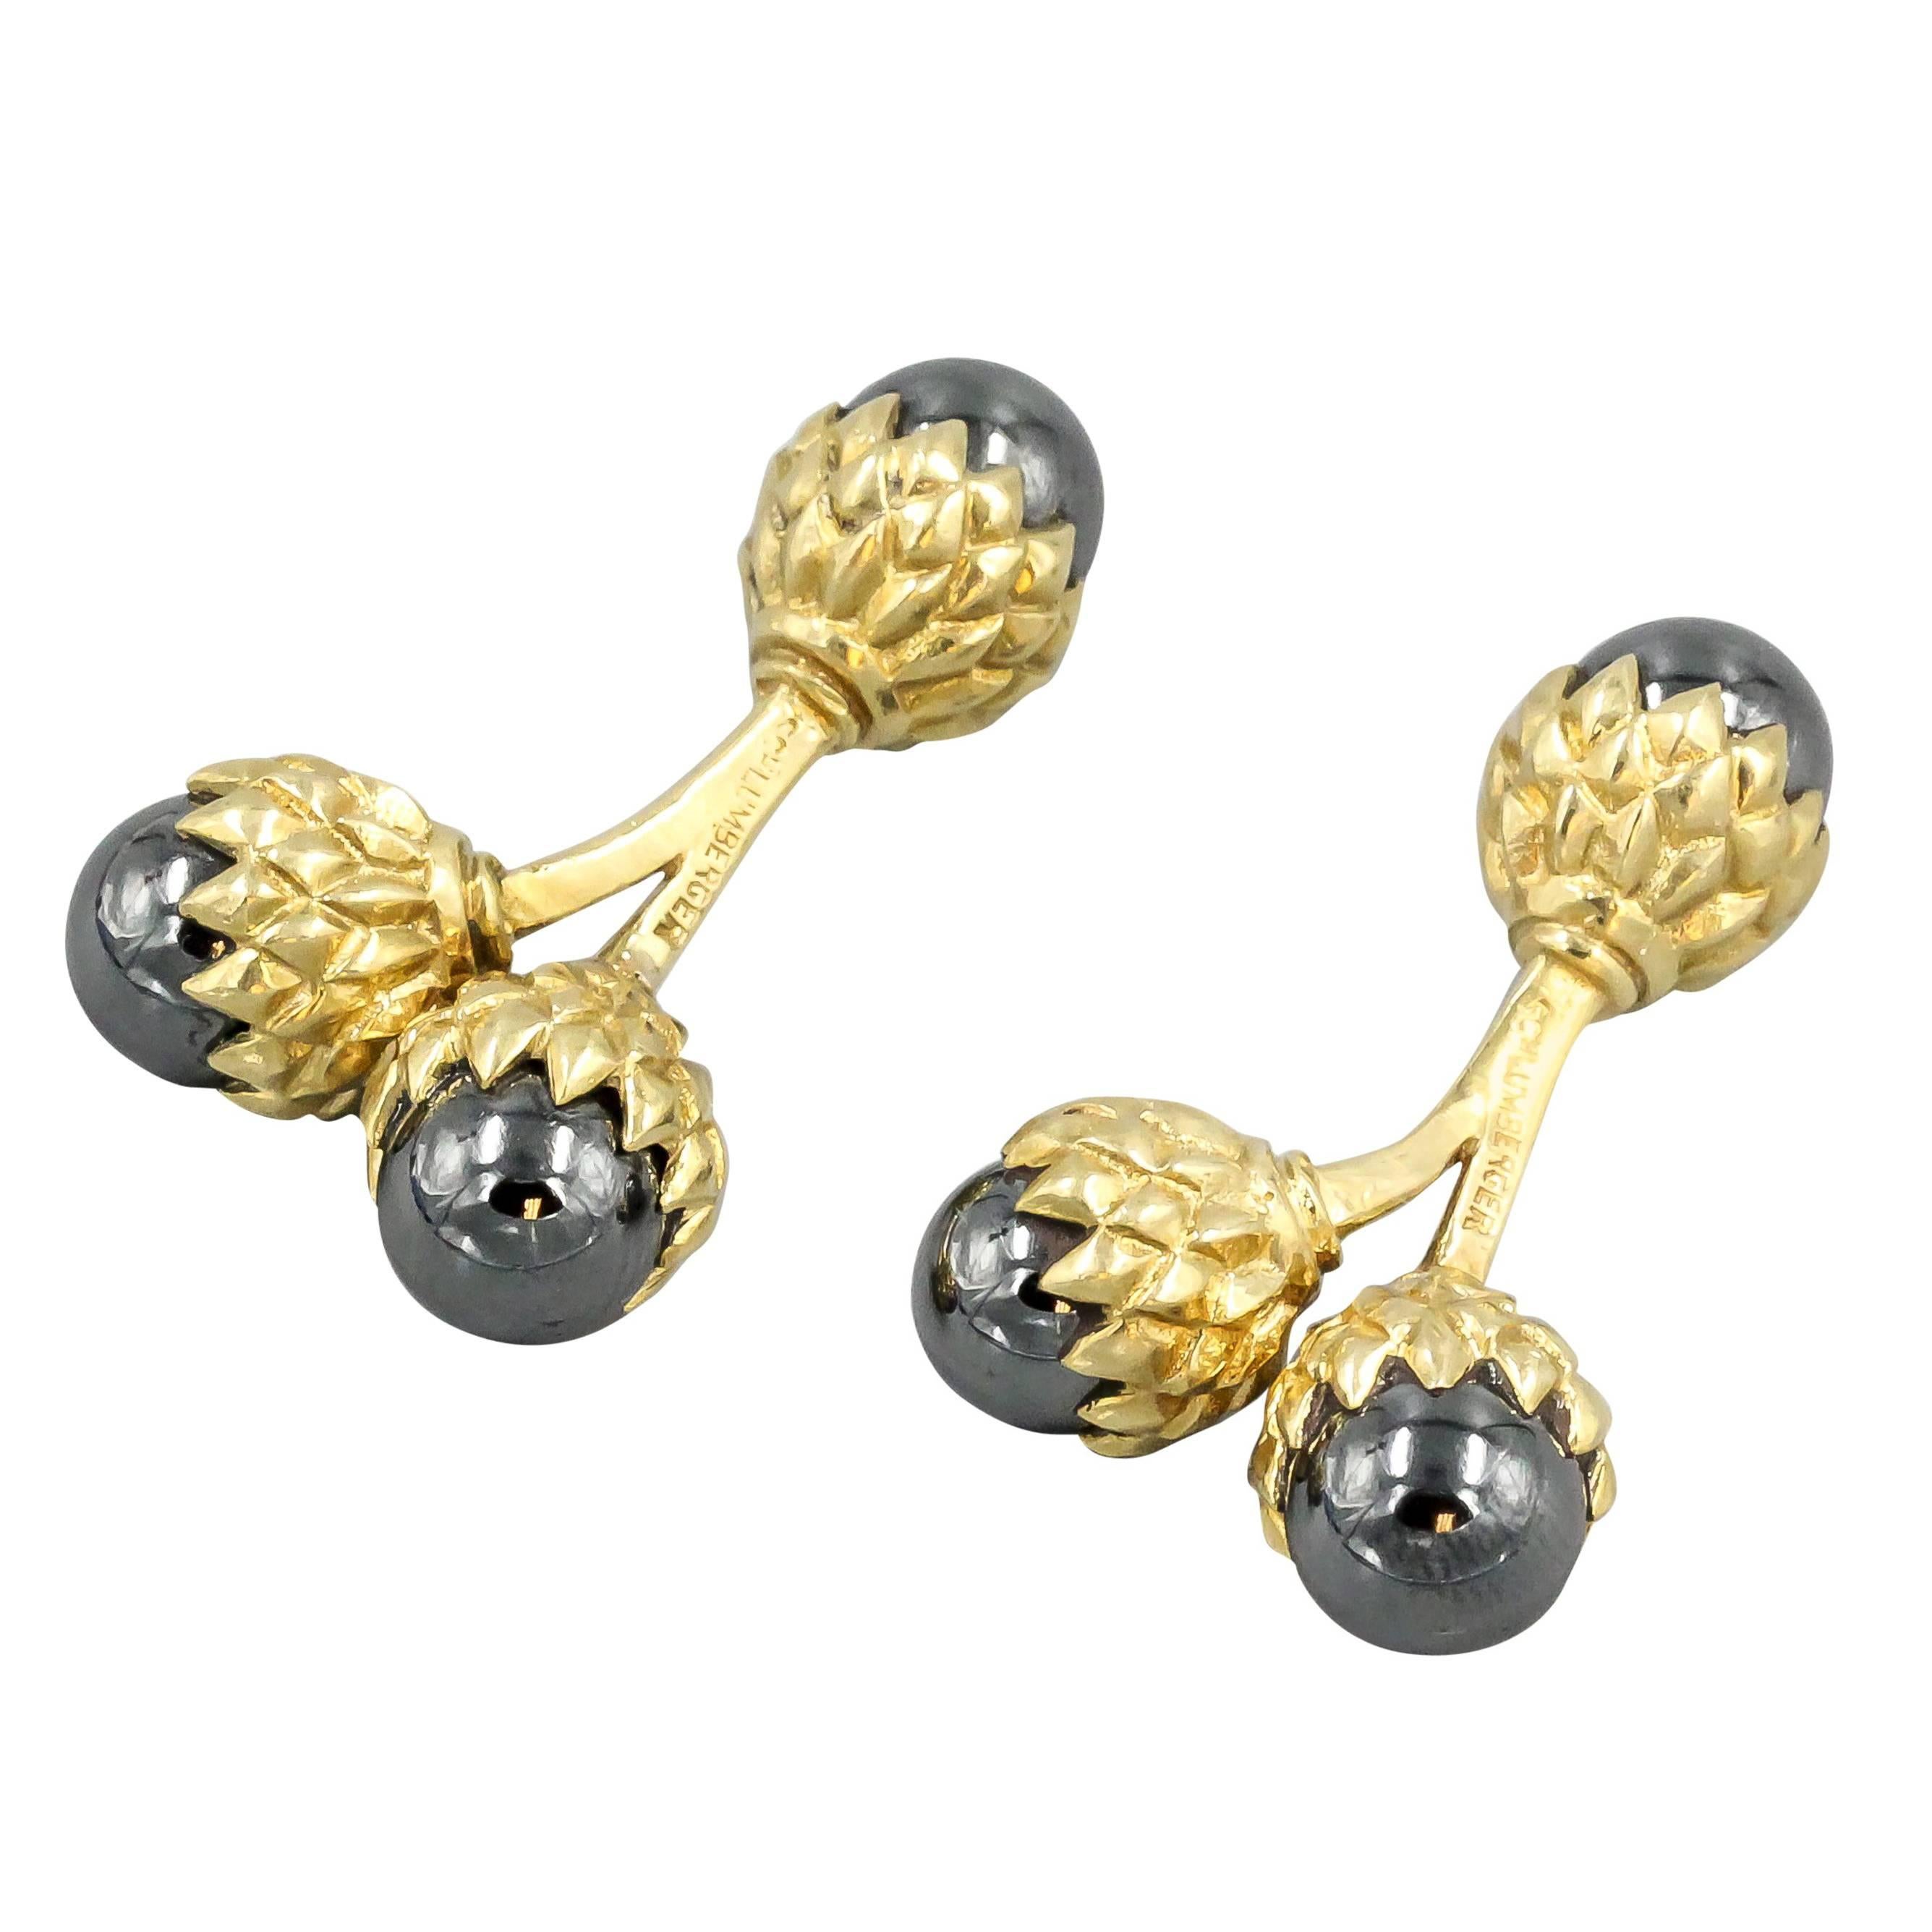 Tiffany & Co. Schlumberger Hematite and Gold Double Acorn Cufflinks